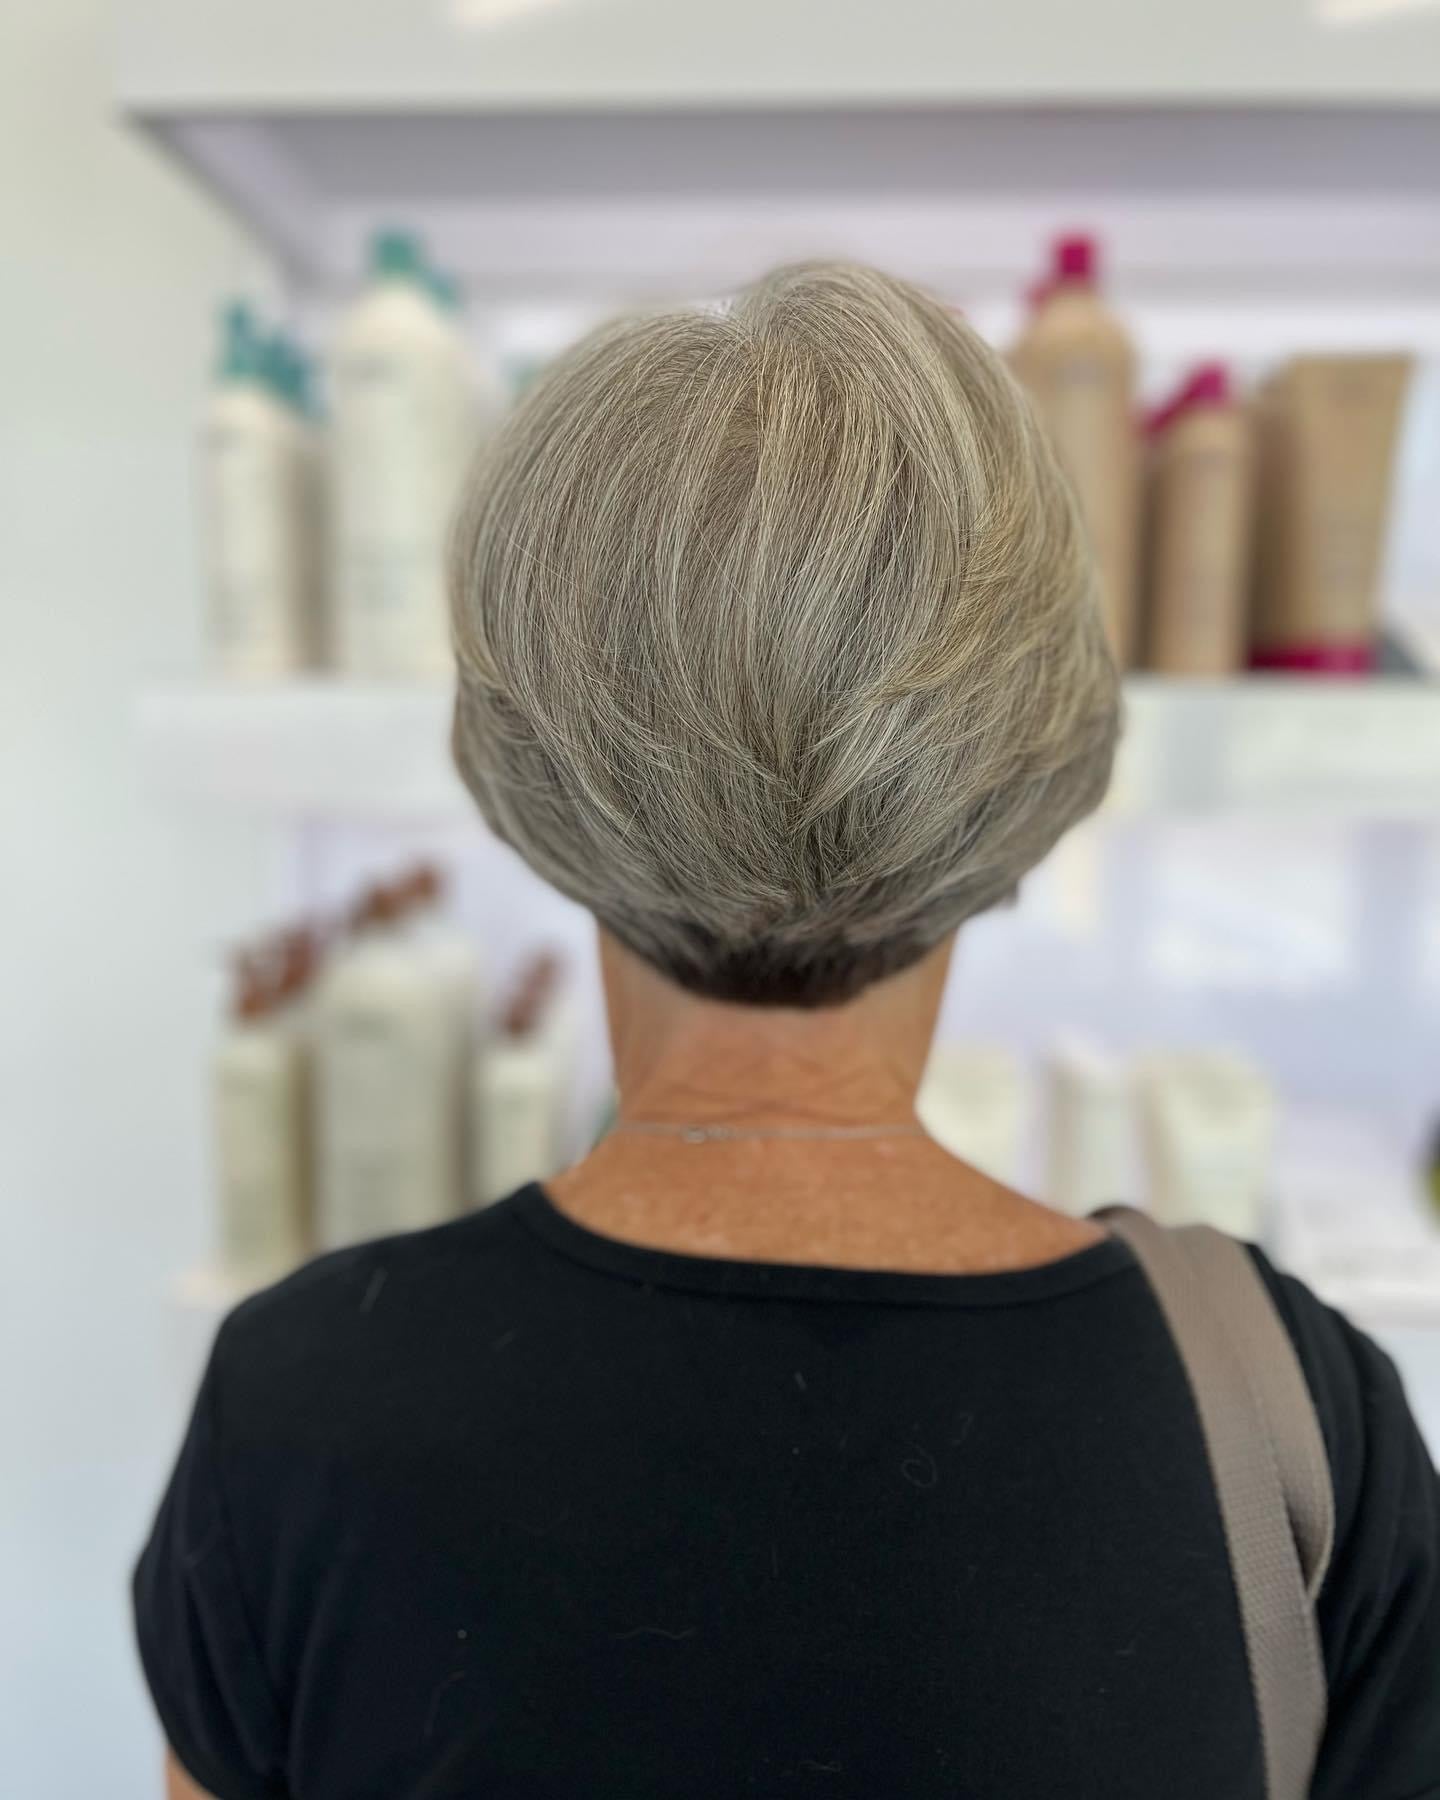 Going Grey: The Latest Trend in Hair Extensions